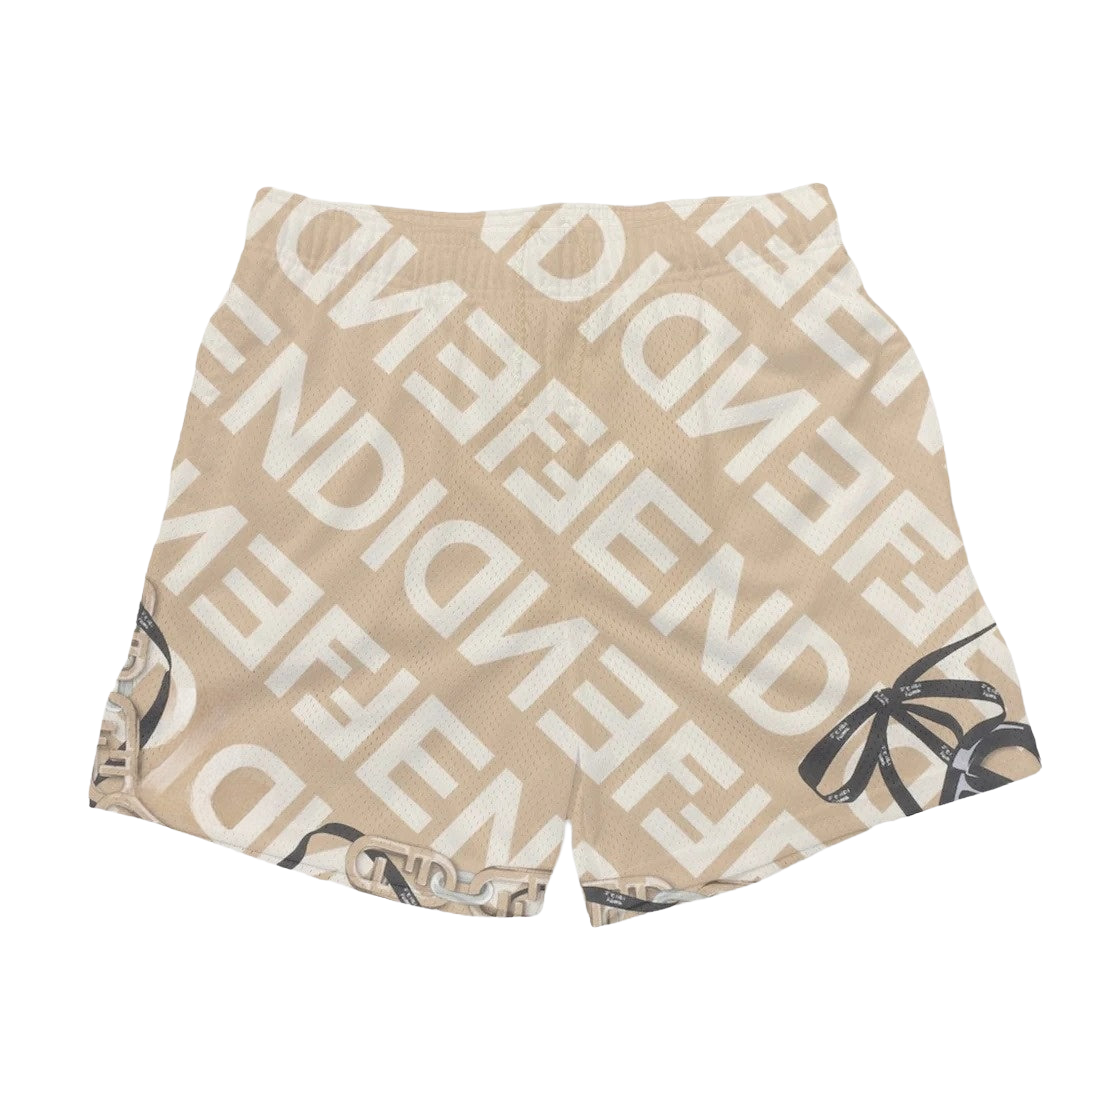 a beige shorts with a black and white print on it